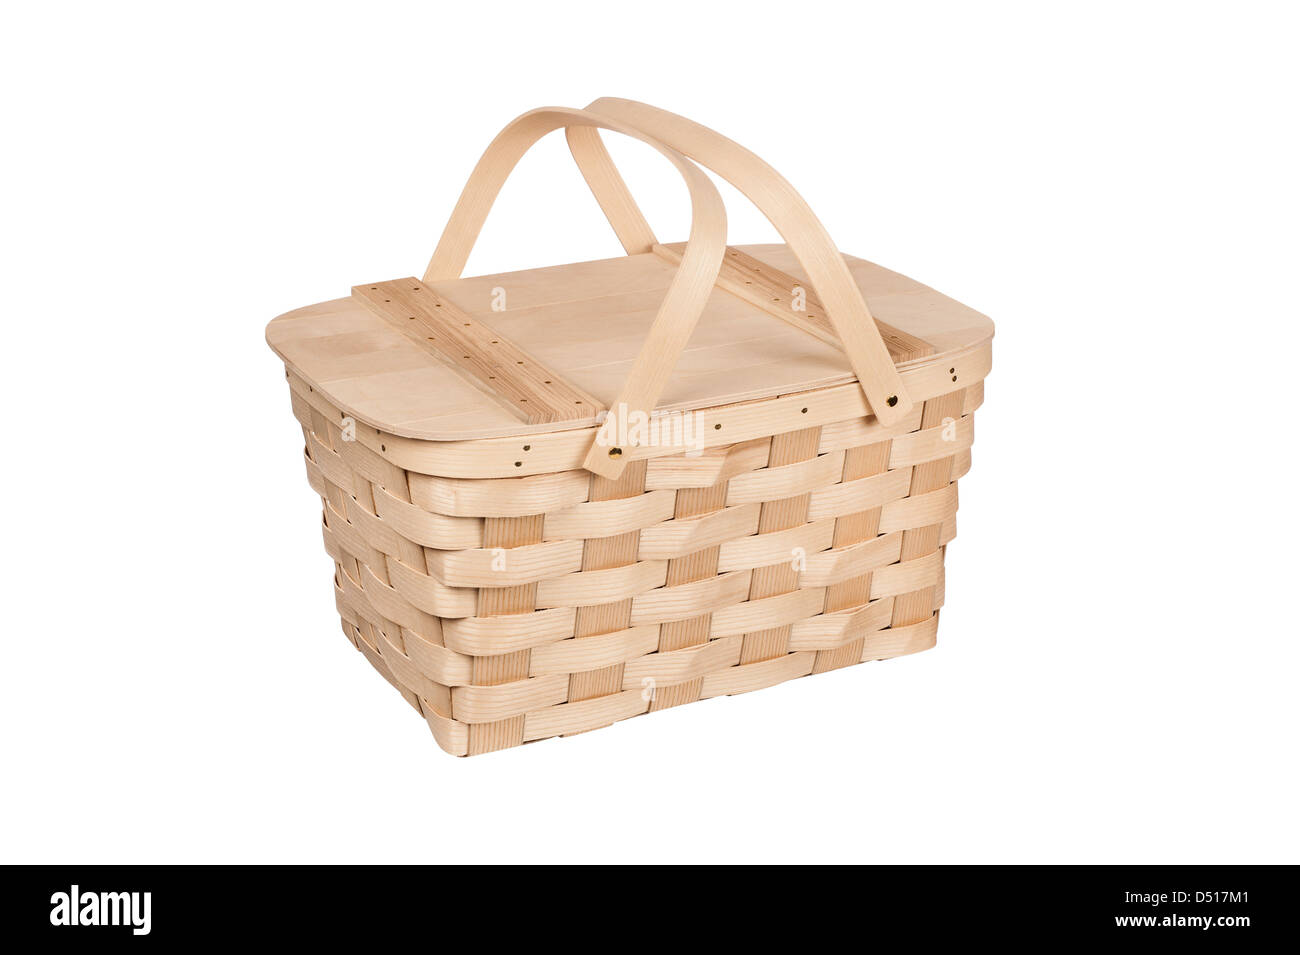 A new wicker and wood picnic basket with lid and handles isolated on white. Stock Photo